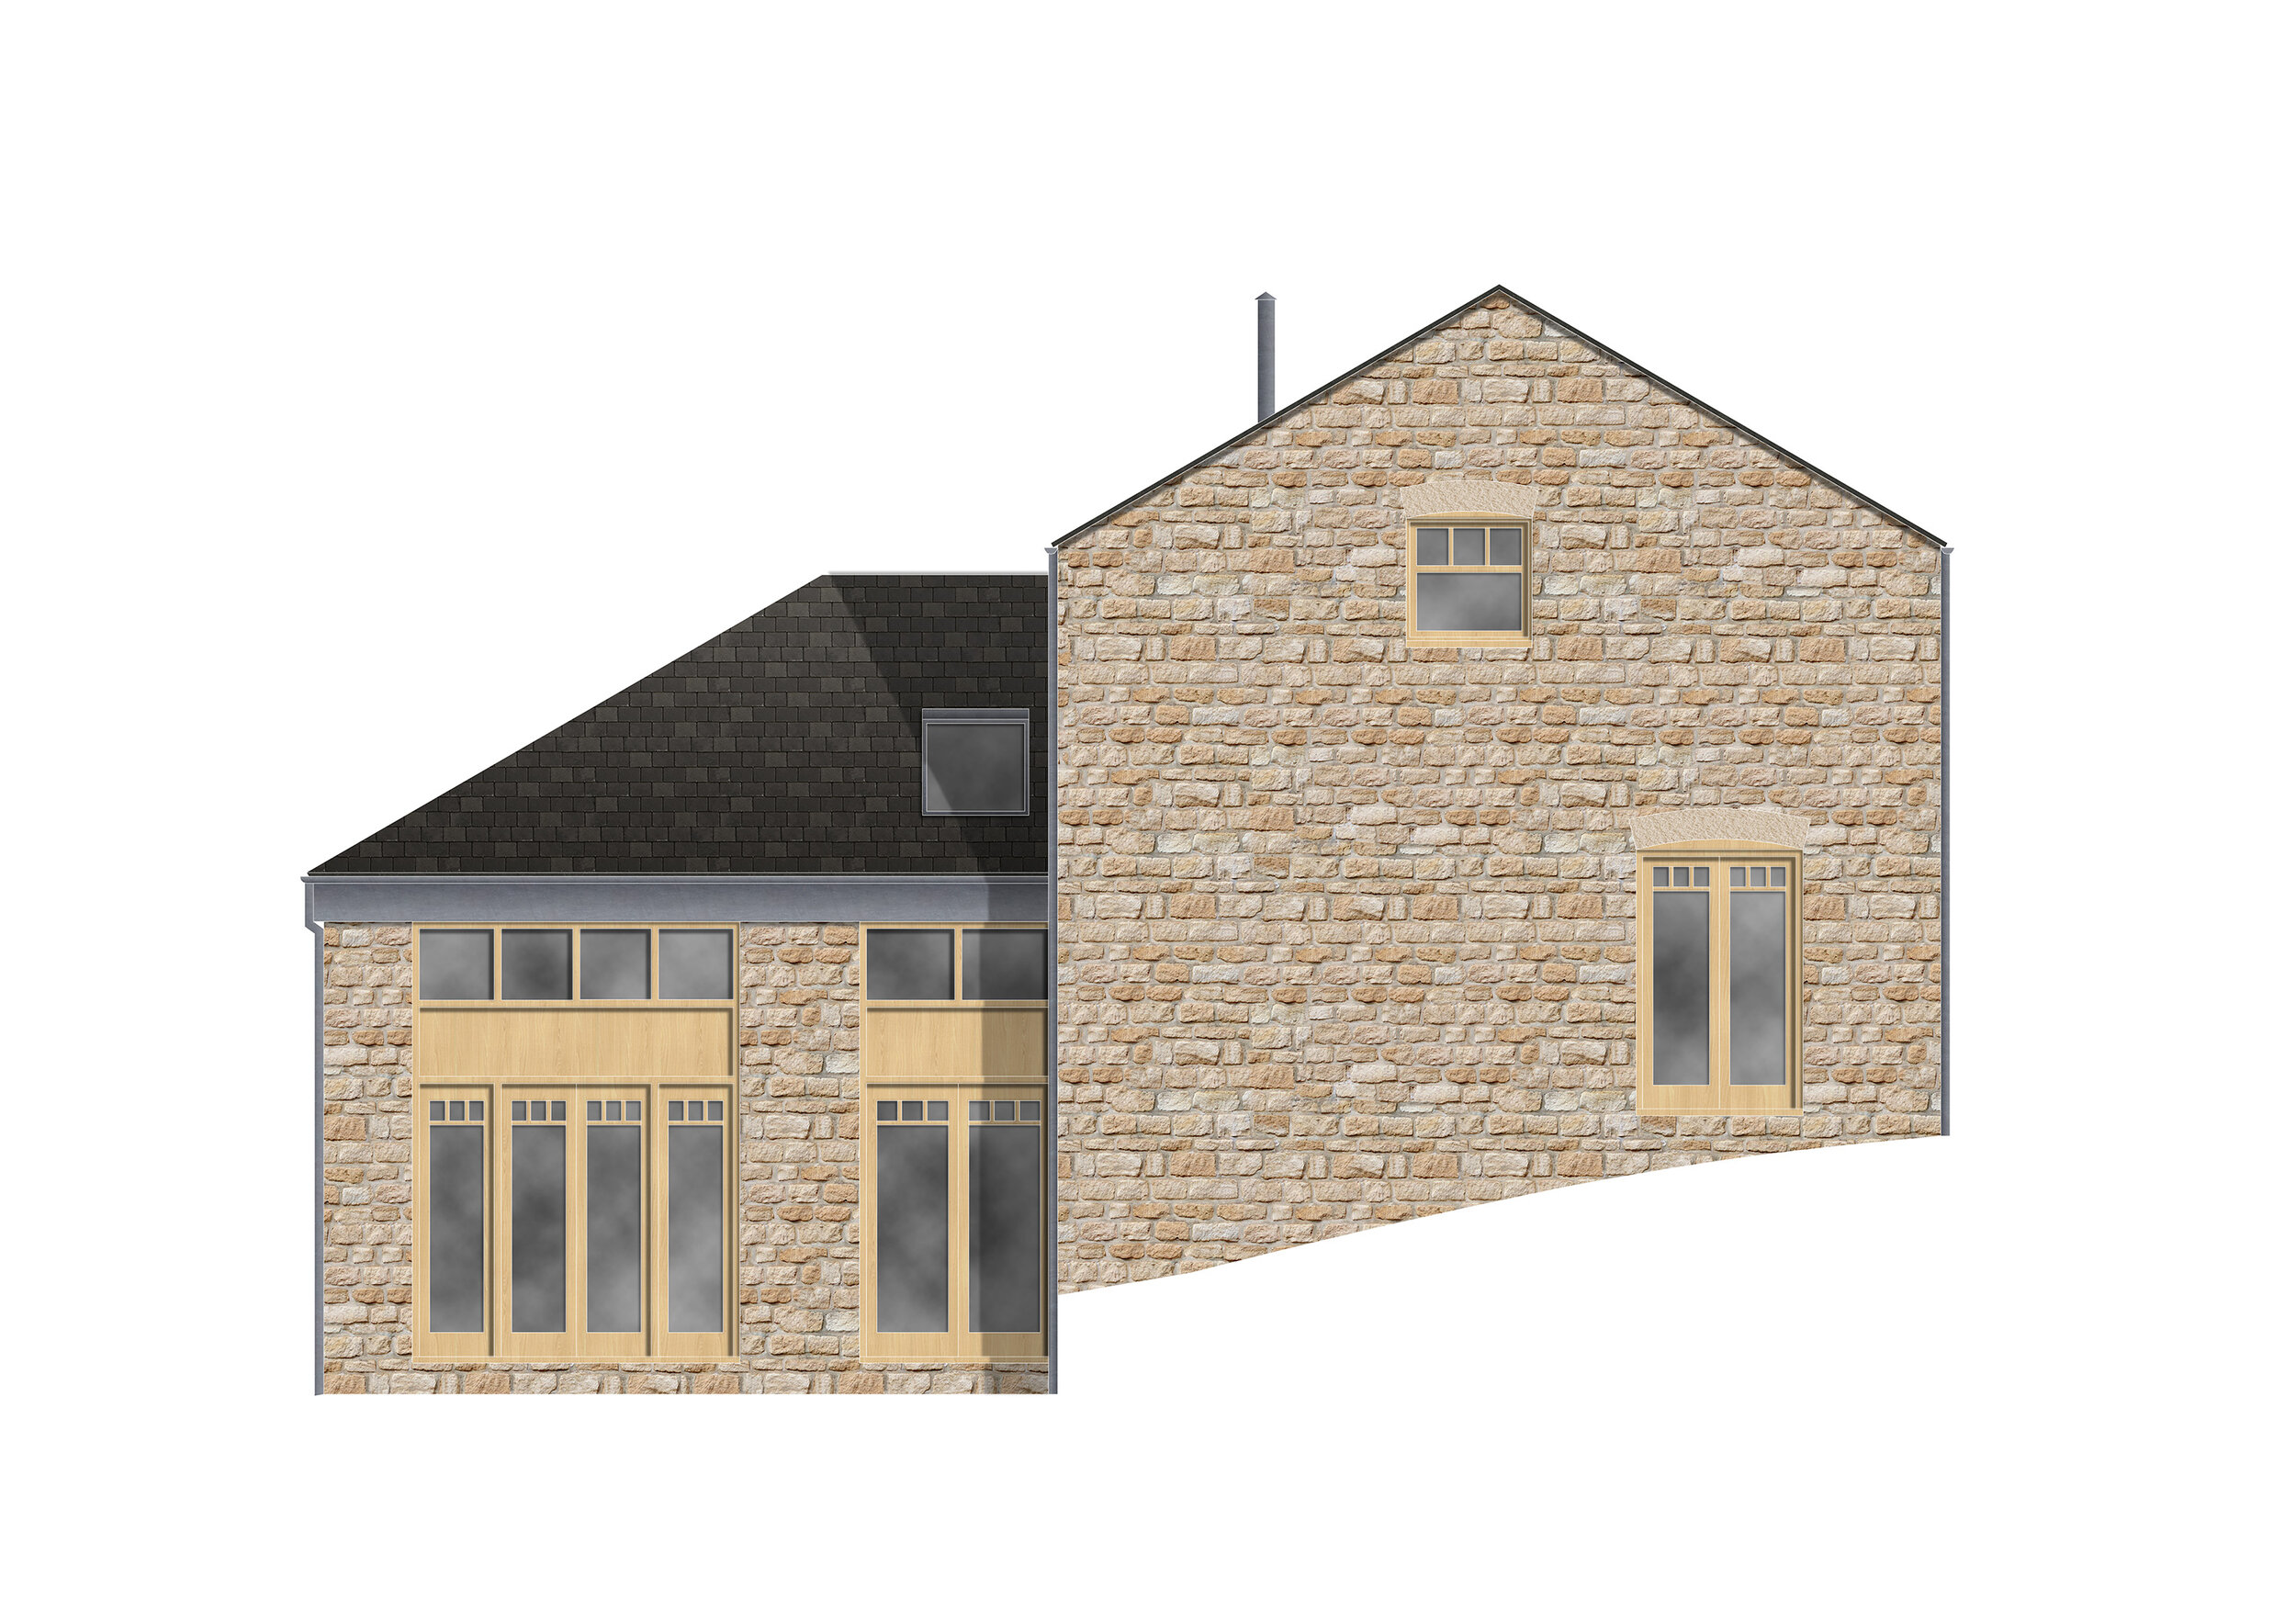 RENDERED ELEVATION - GRINDING MILL HOUSE - LEEDS ARCHITECTS - SAMUEL KENDALL ASSOCIATES